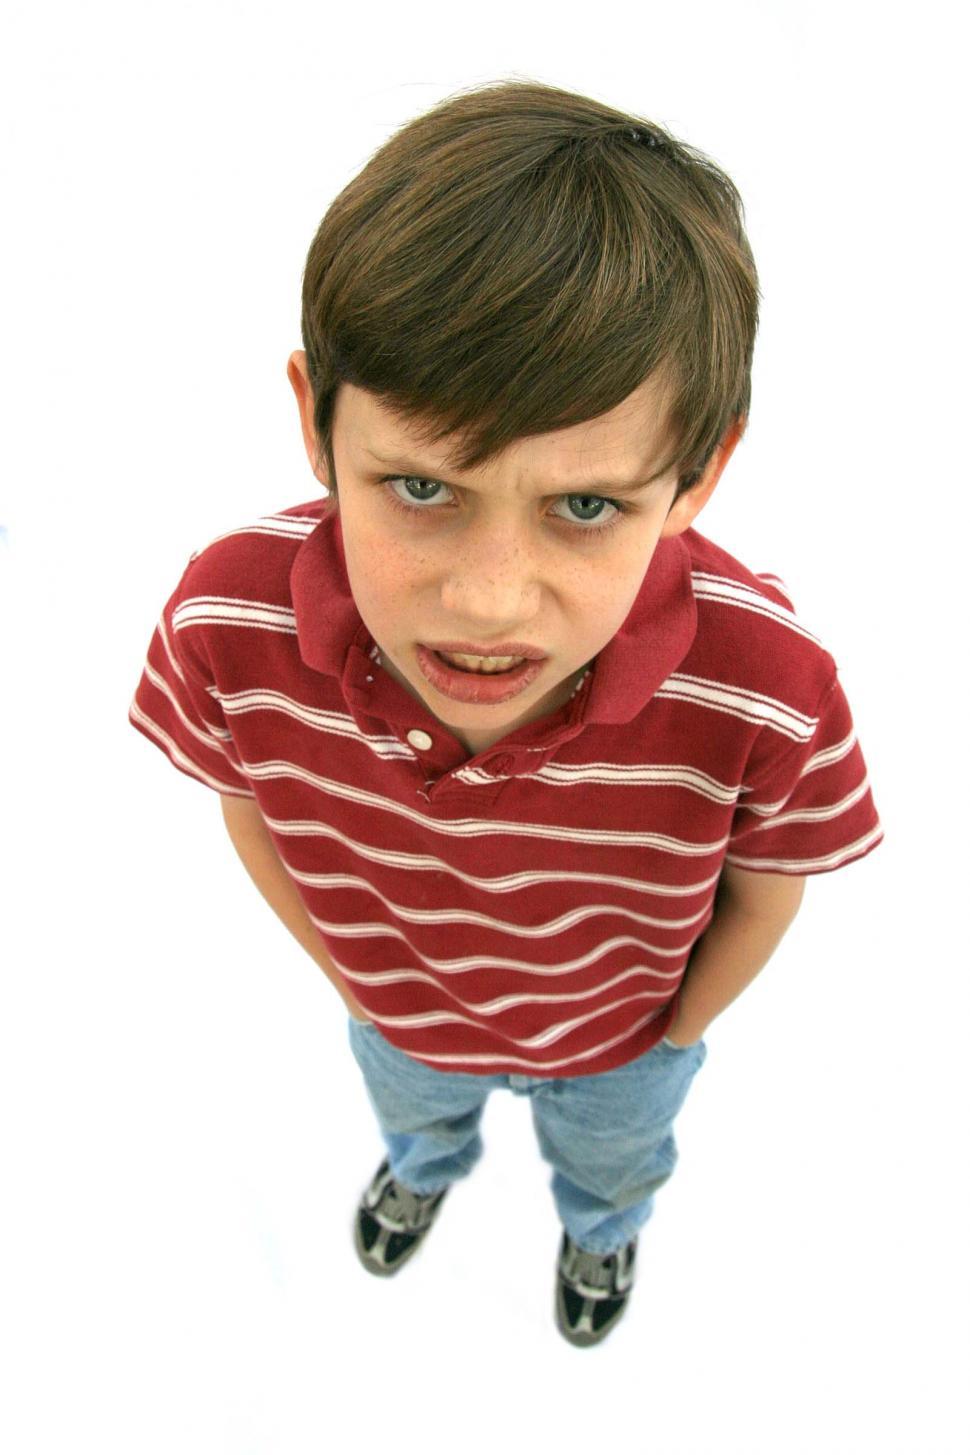 Download Free Stock Photo of Angry defiant little boy 